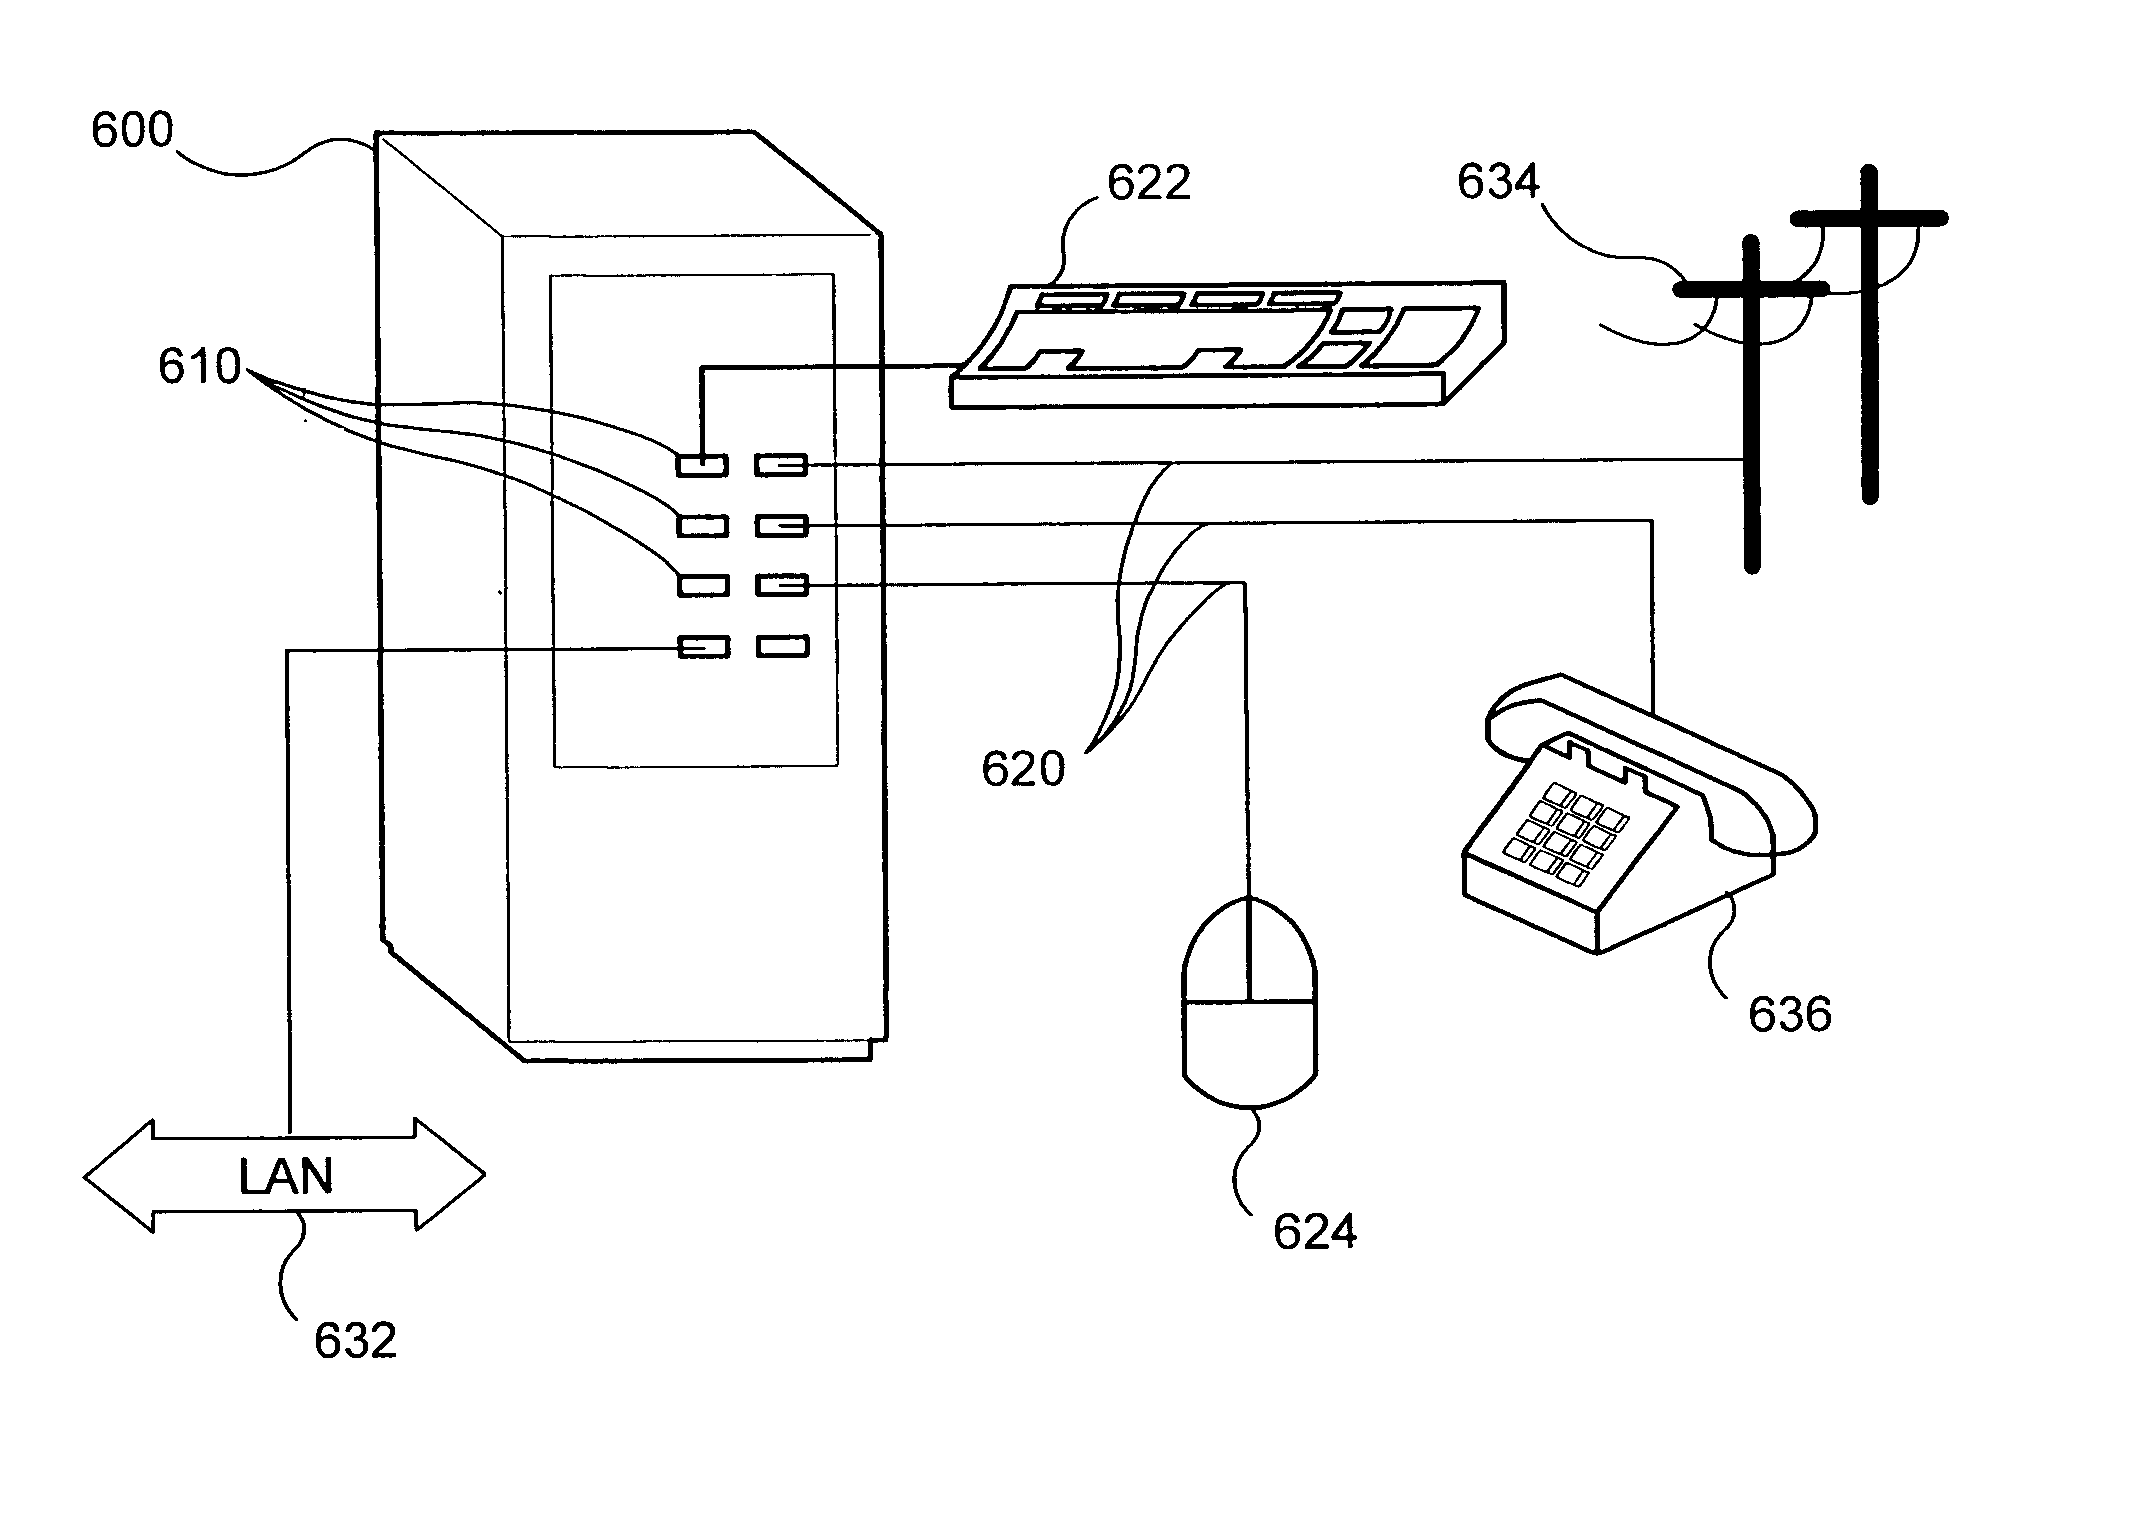 System and method for providing a universal communications port with computer-telephony interface